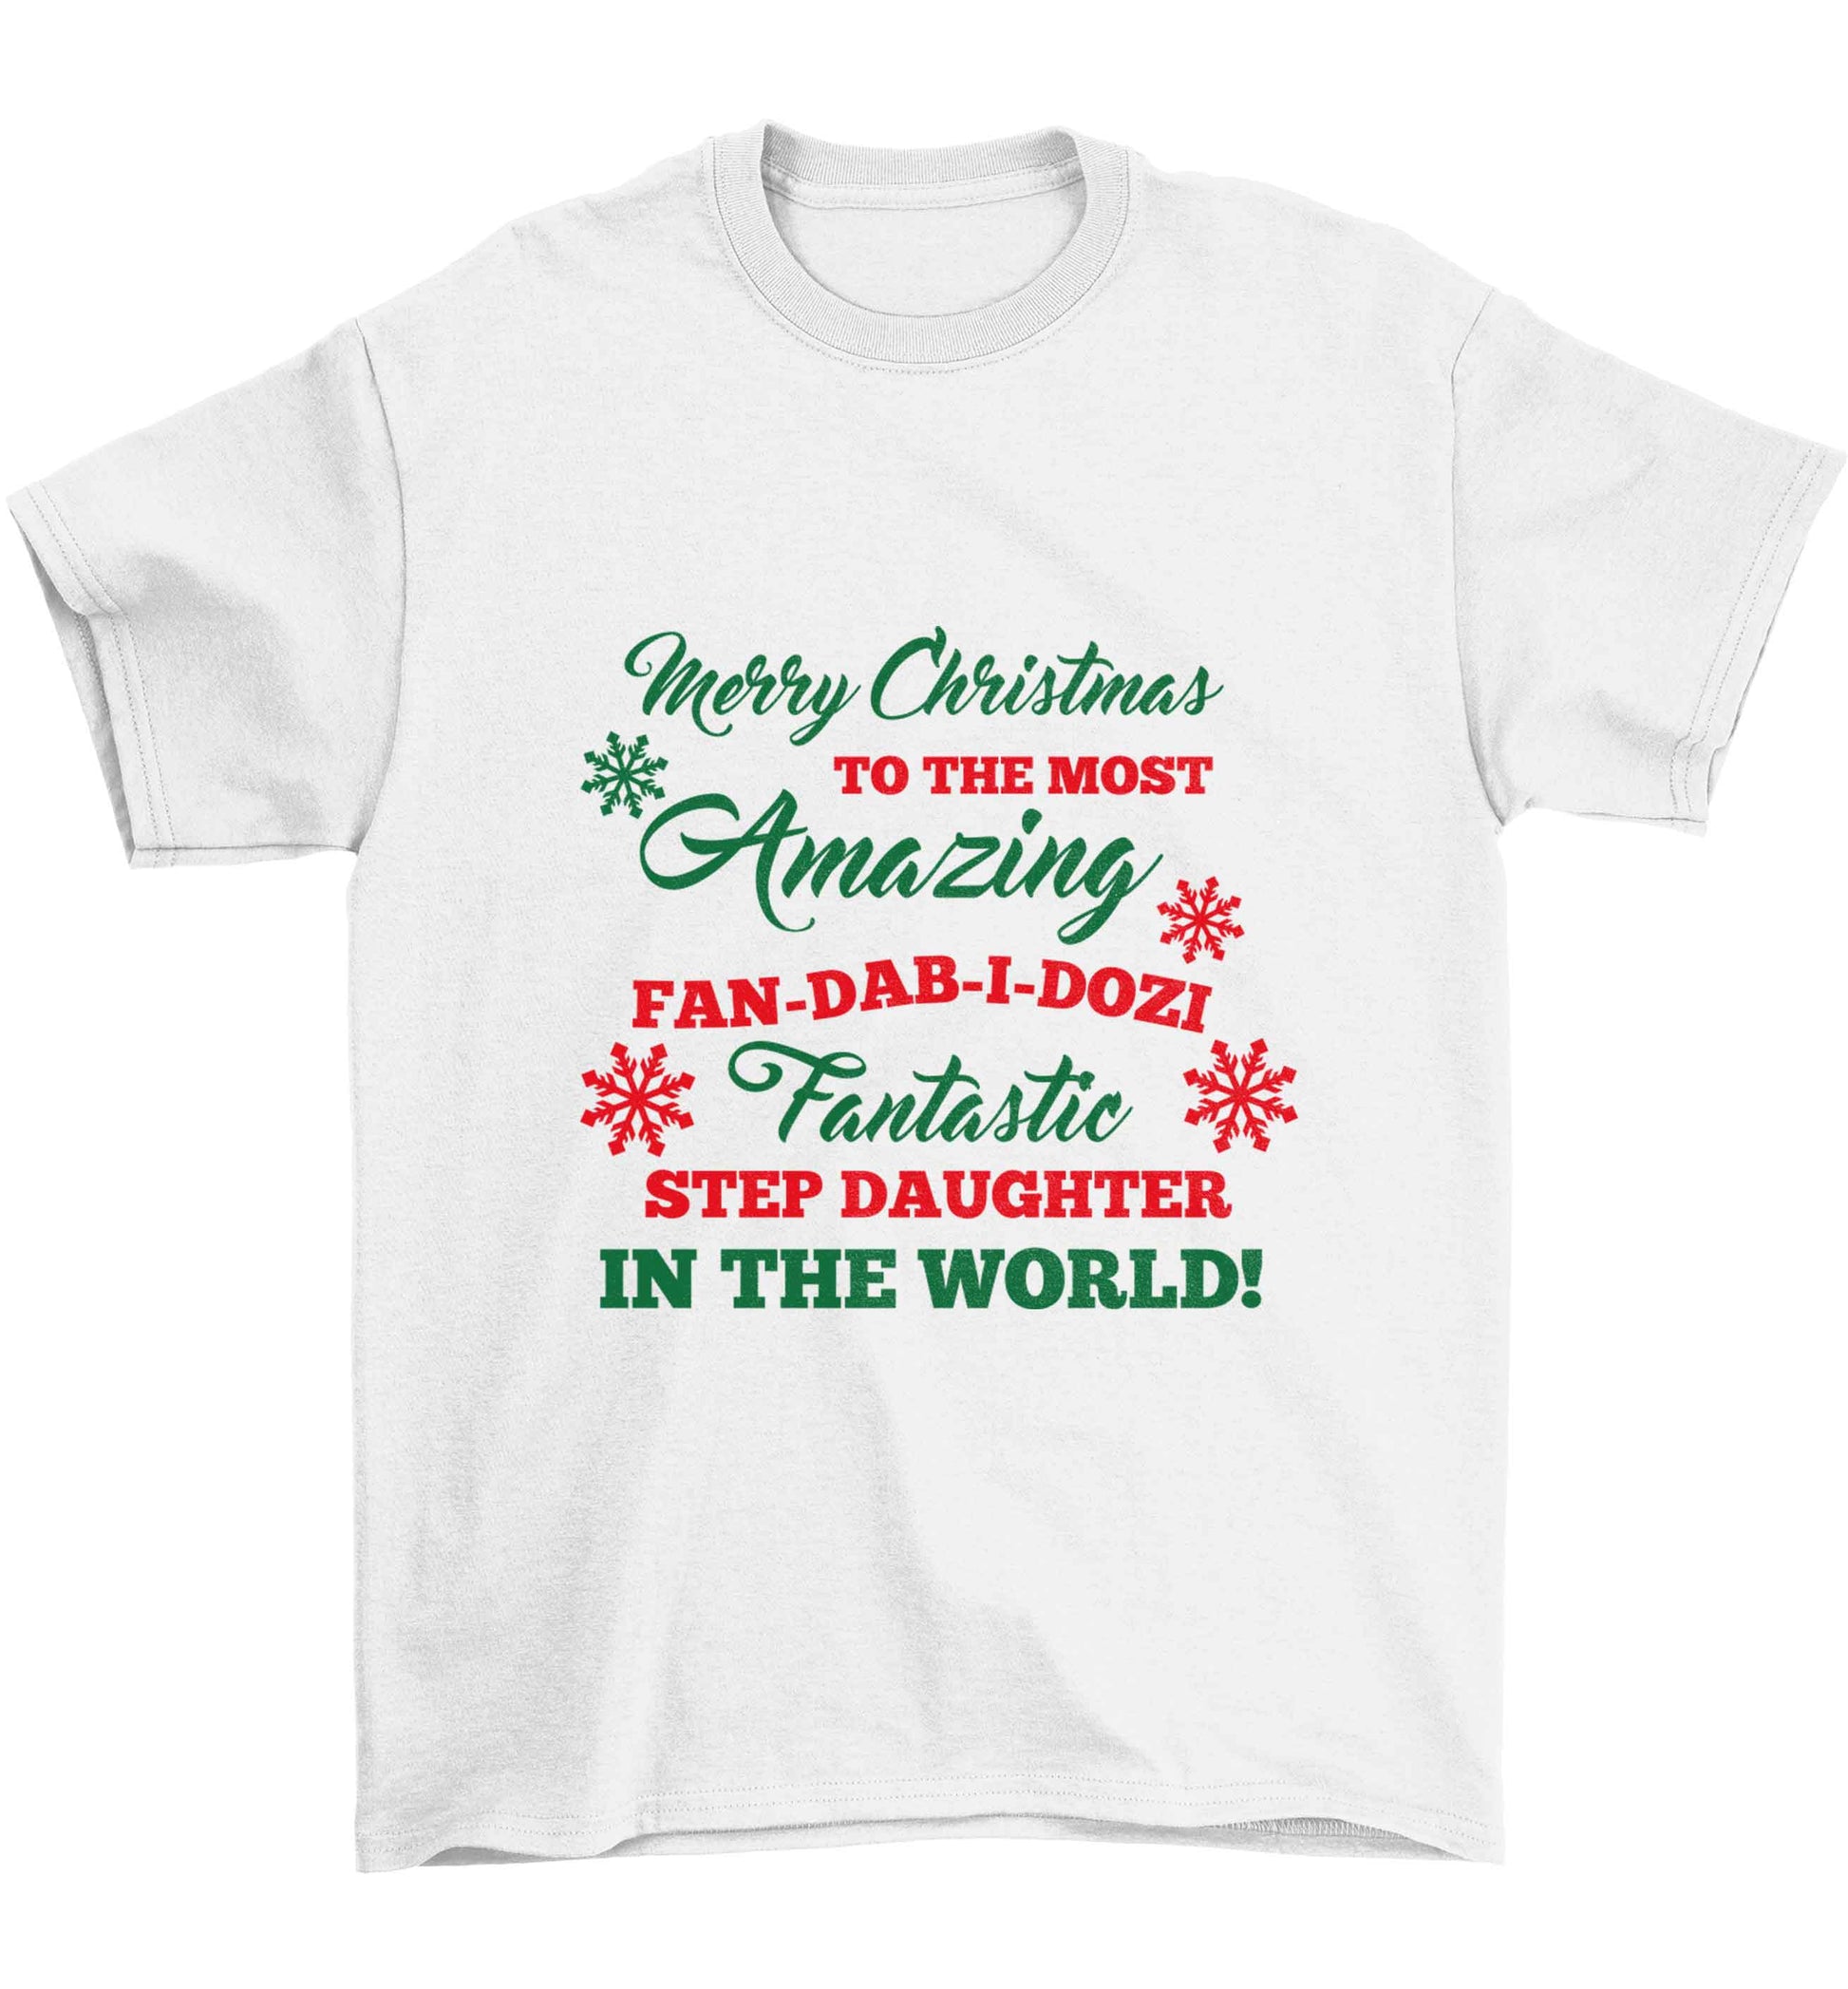 Merry Christmas to the most amazing fan-dab-i-dozi fantasic Step Daughter in the world Children's white Tshirt 12-13 Years